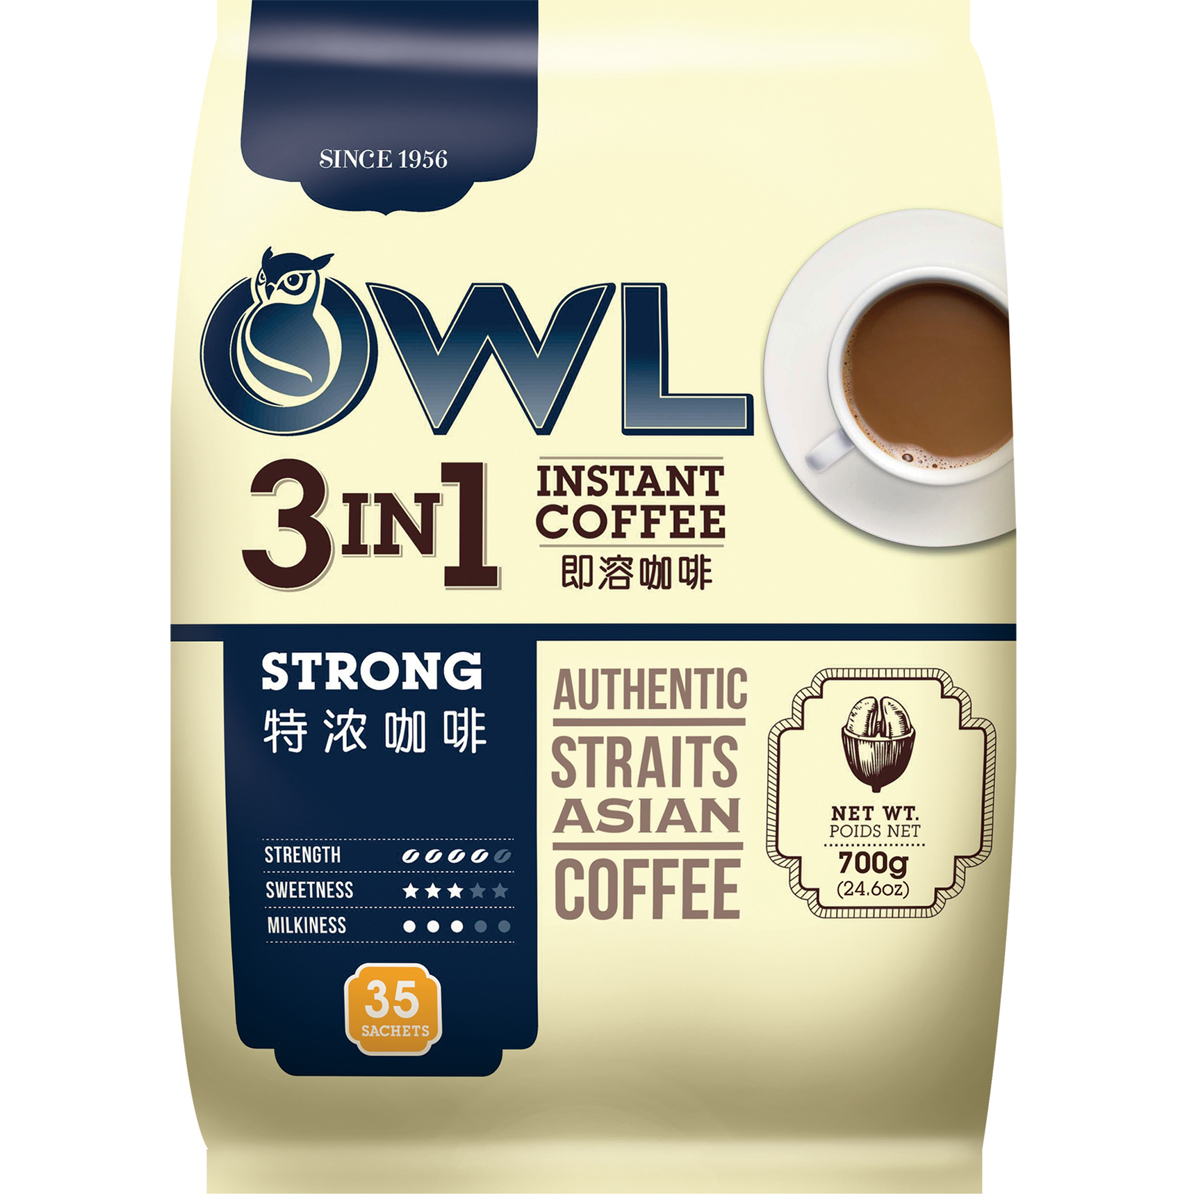 Owl owl coffee purview three in 700g instant coffee